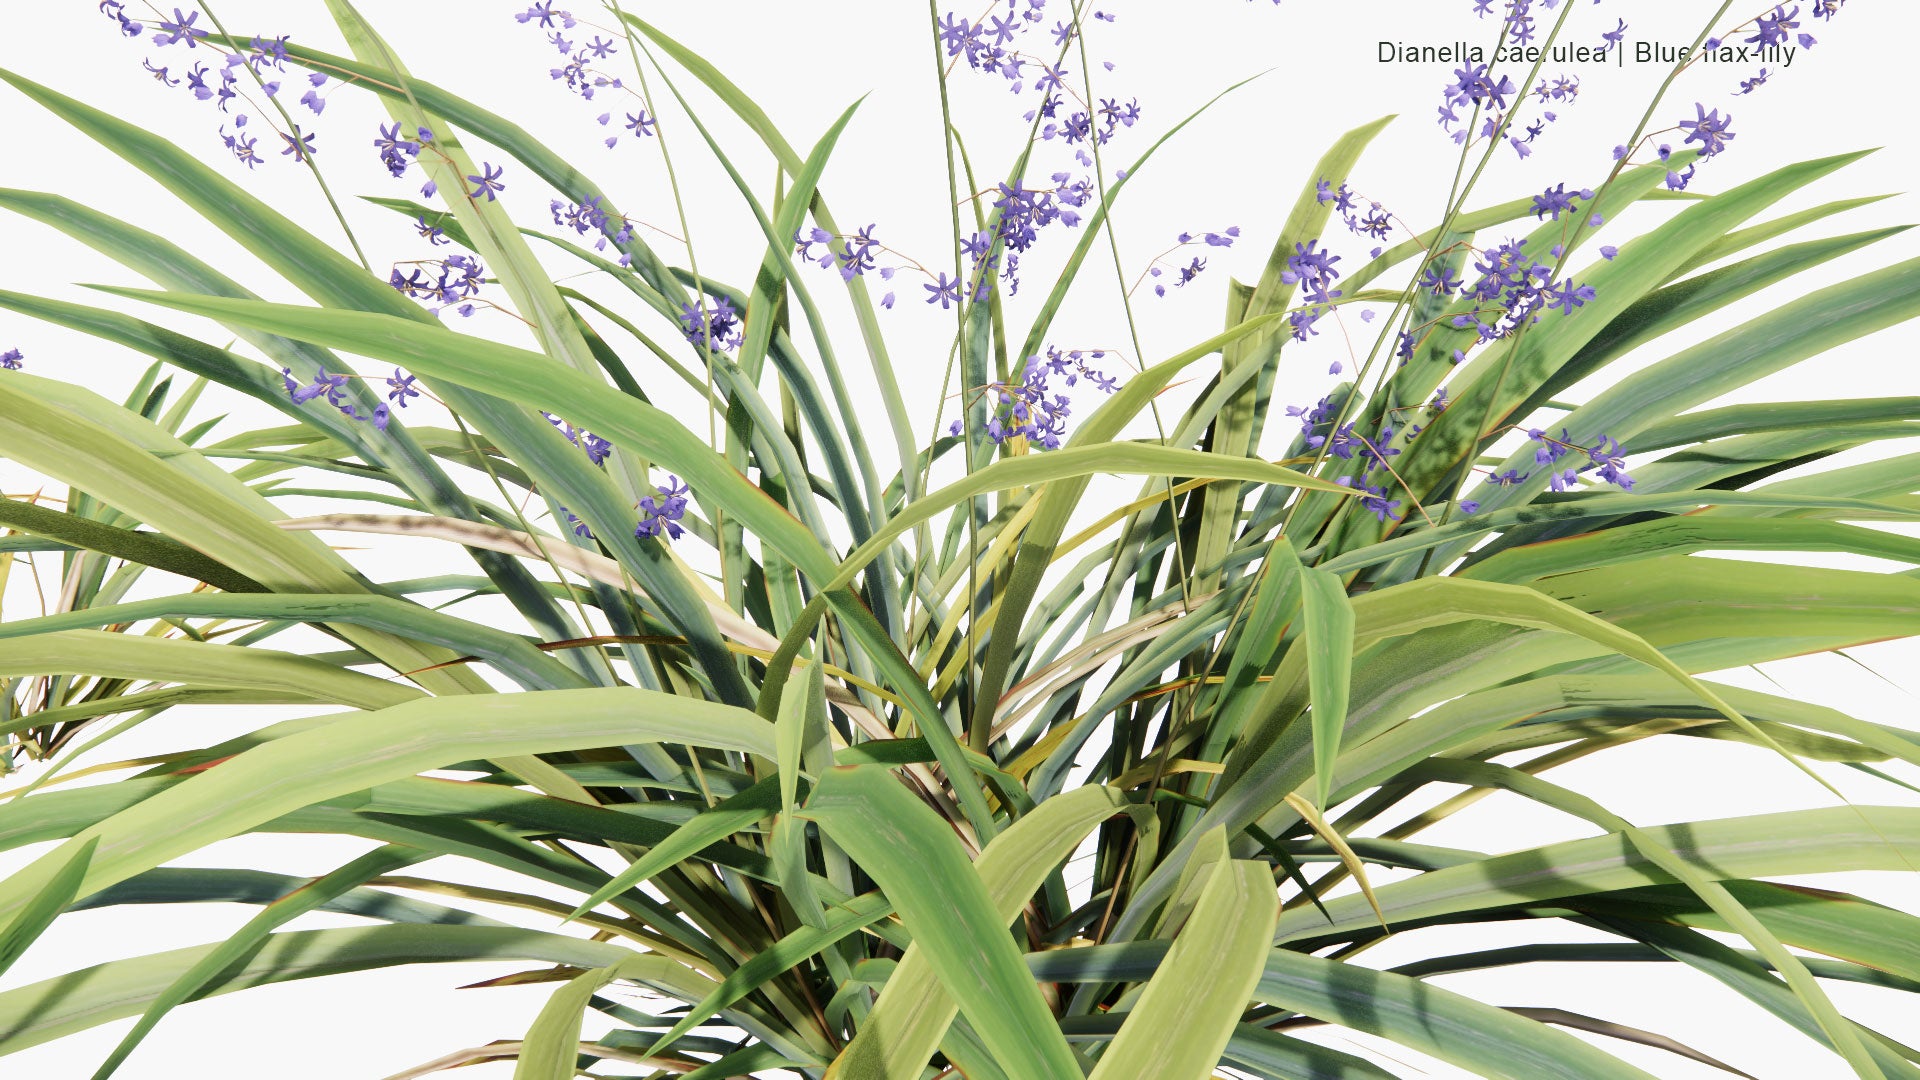 Low Poly Dianella Caerulea - Blue Flax-Lily, Paroo Lily (3D Model)